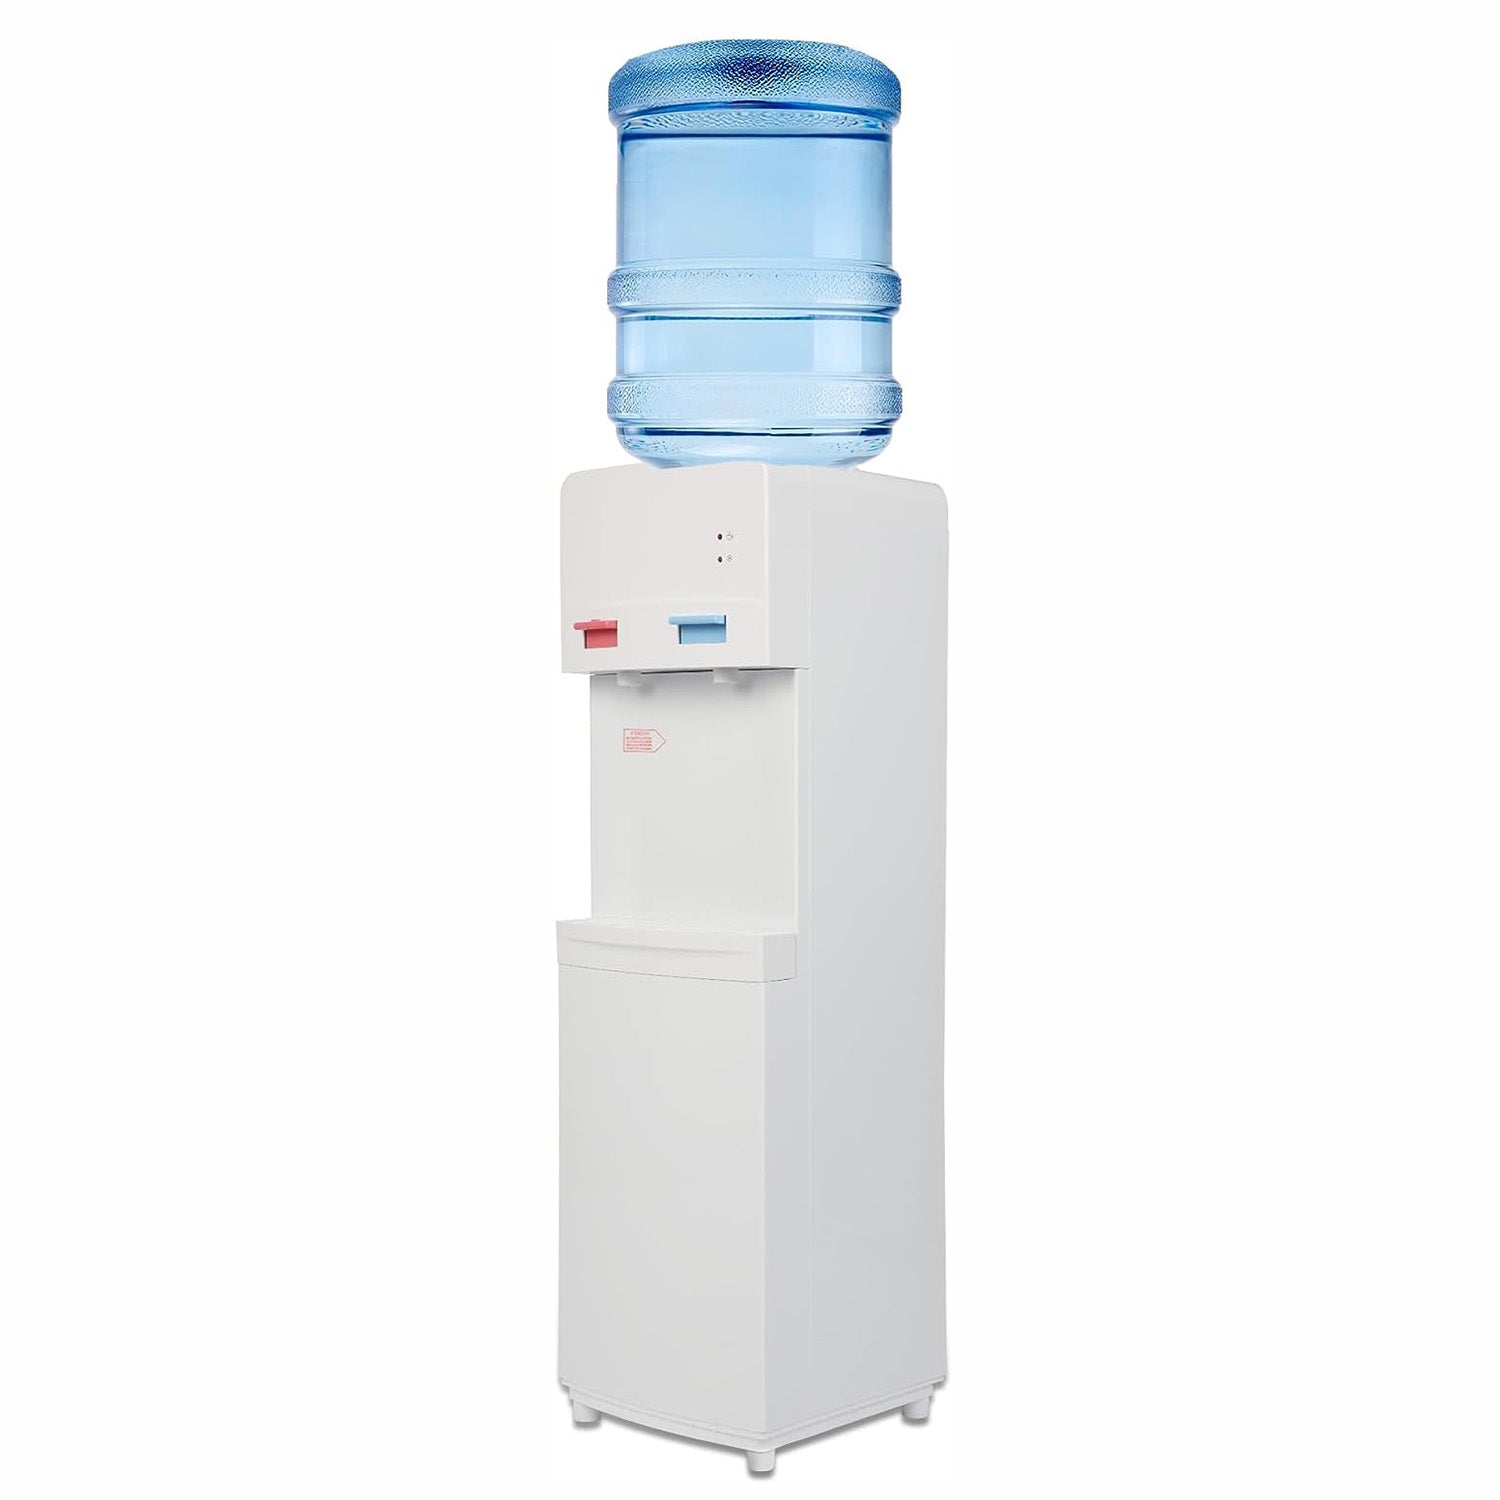 3-5 Gallon Top Loading Water Dispenser Cooler Hot and Cold with Child Safety Lock, ETL Listed, White